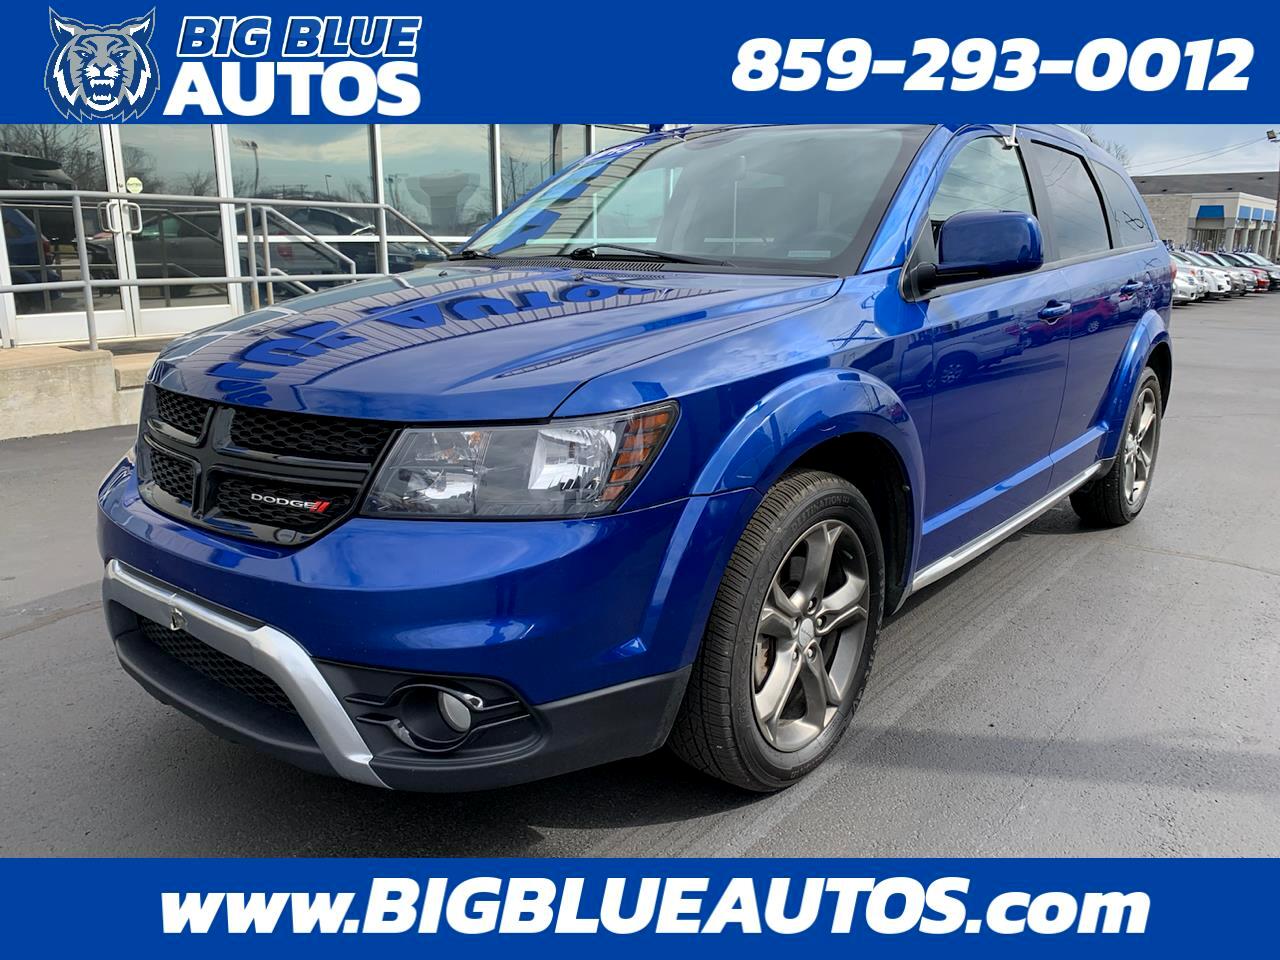 Used 2015 Dodge Journey FWD 4dr Crossroad for Sale in Lexington KY 40505  Big Blue Autos